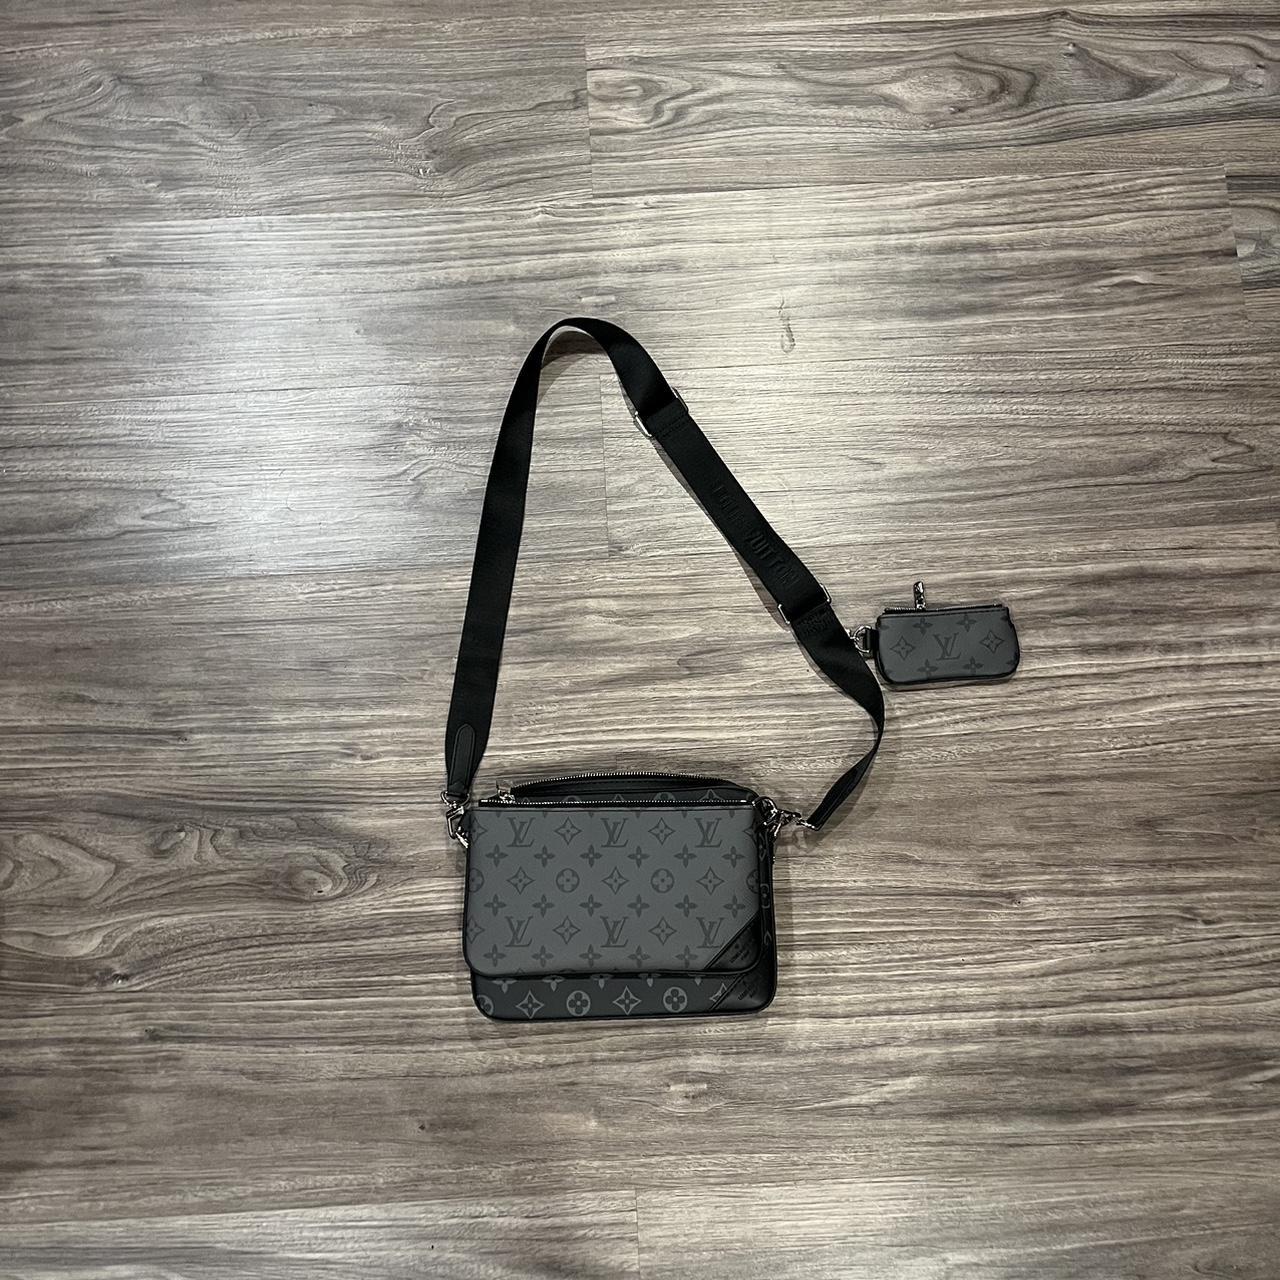 Mean trio messenger bag Bought at sneaker event in chi - Depop